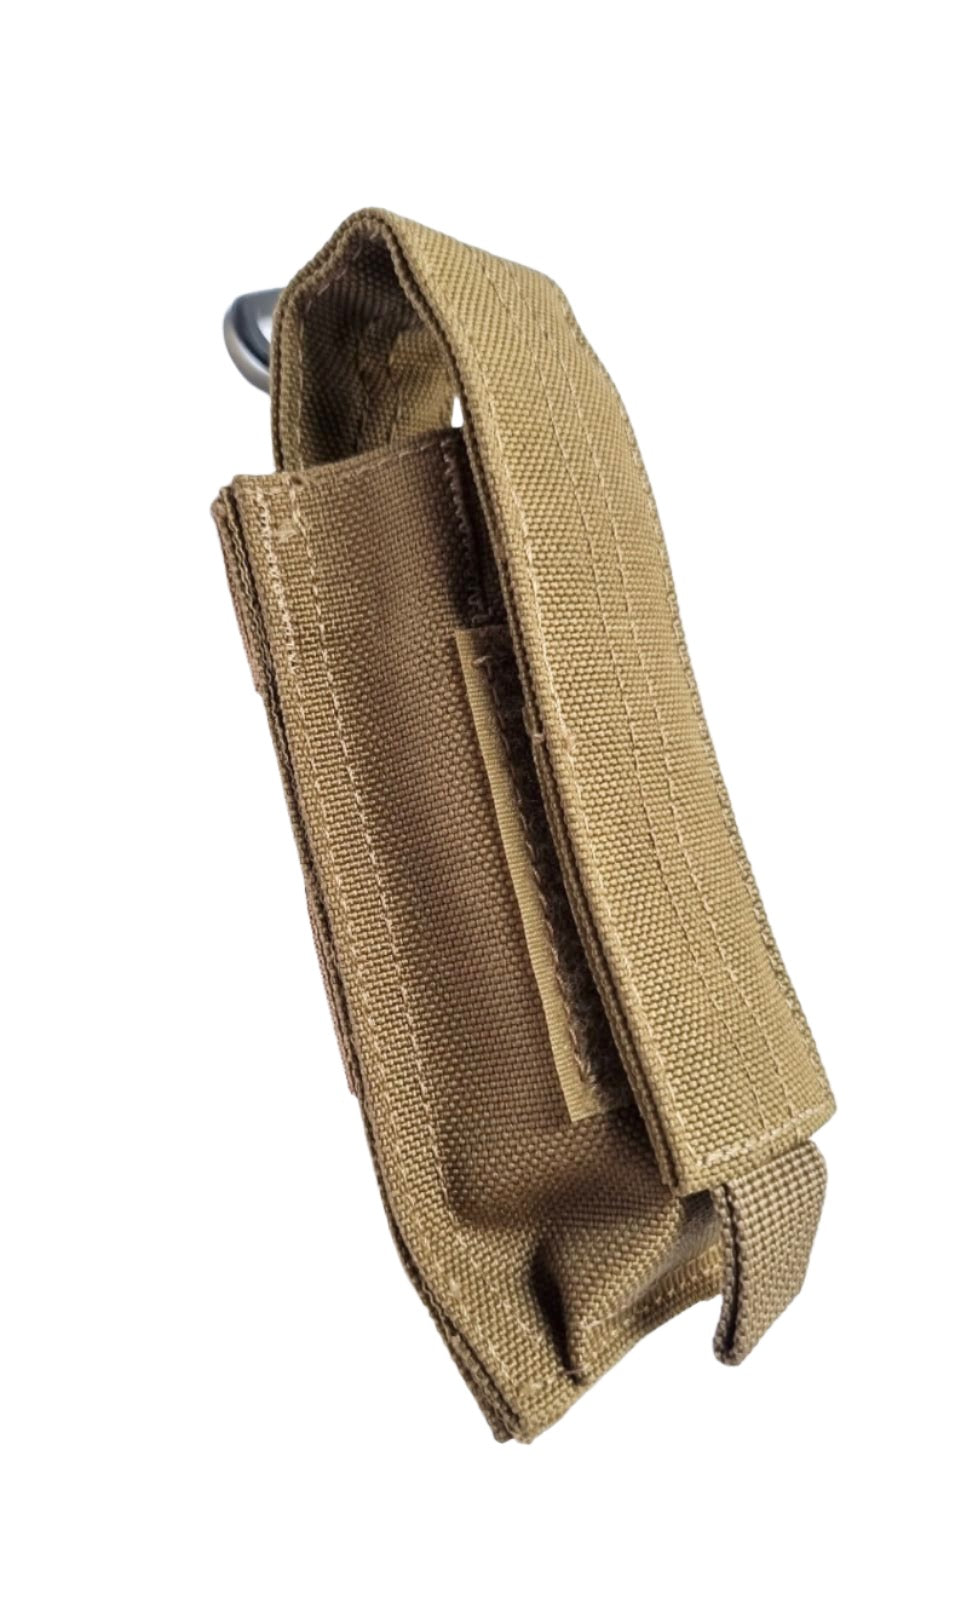 SHE-23029 GRIPTAC SINGLE PISTOL MAG POUCH COYOTE SIDE PIC